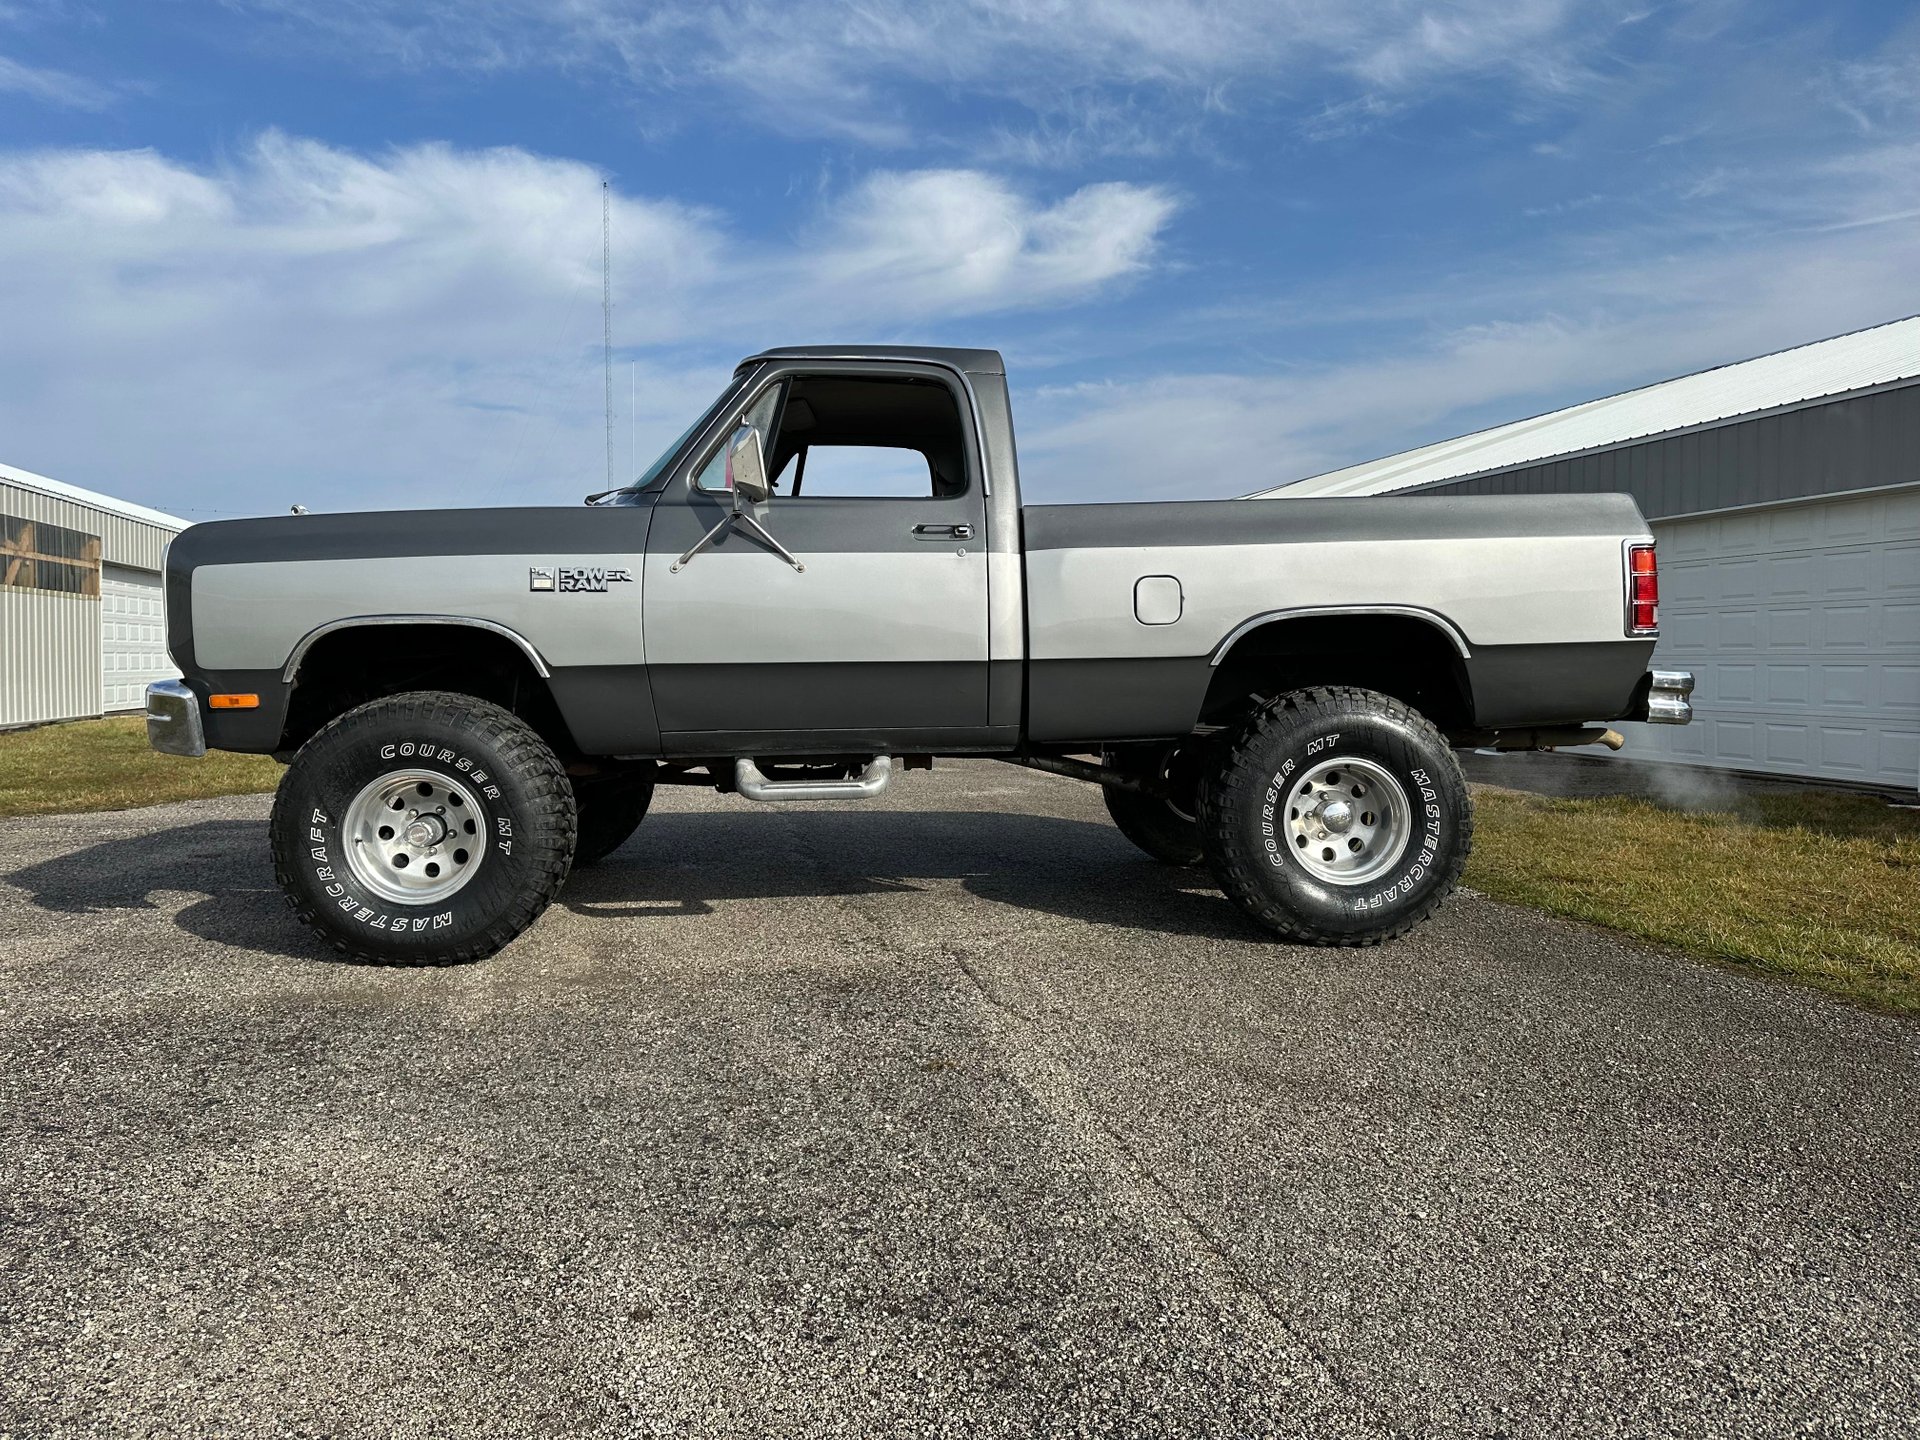 1983 Dodge Power Ram Pickup | Country Classic Cars